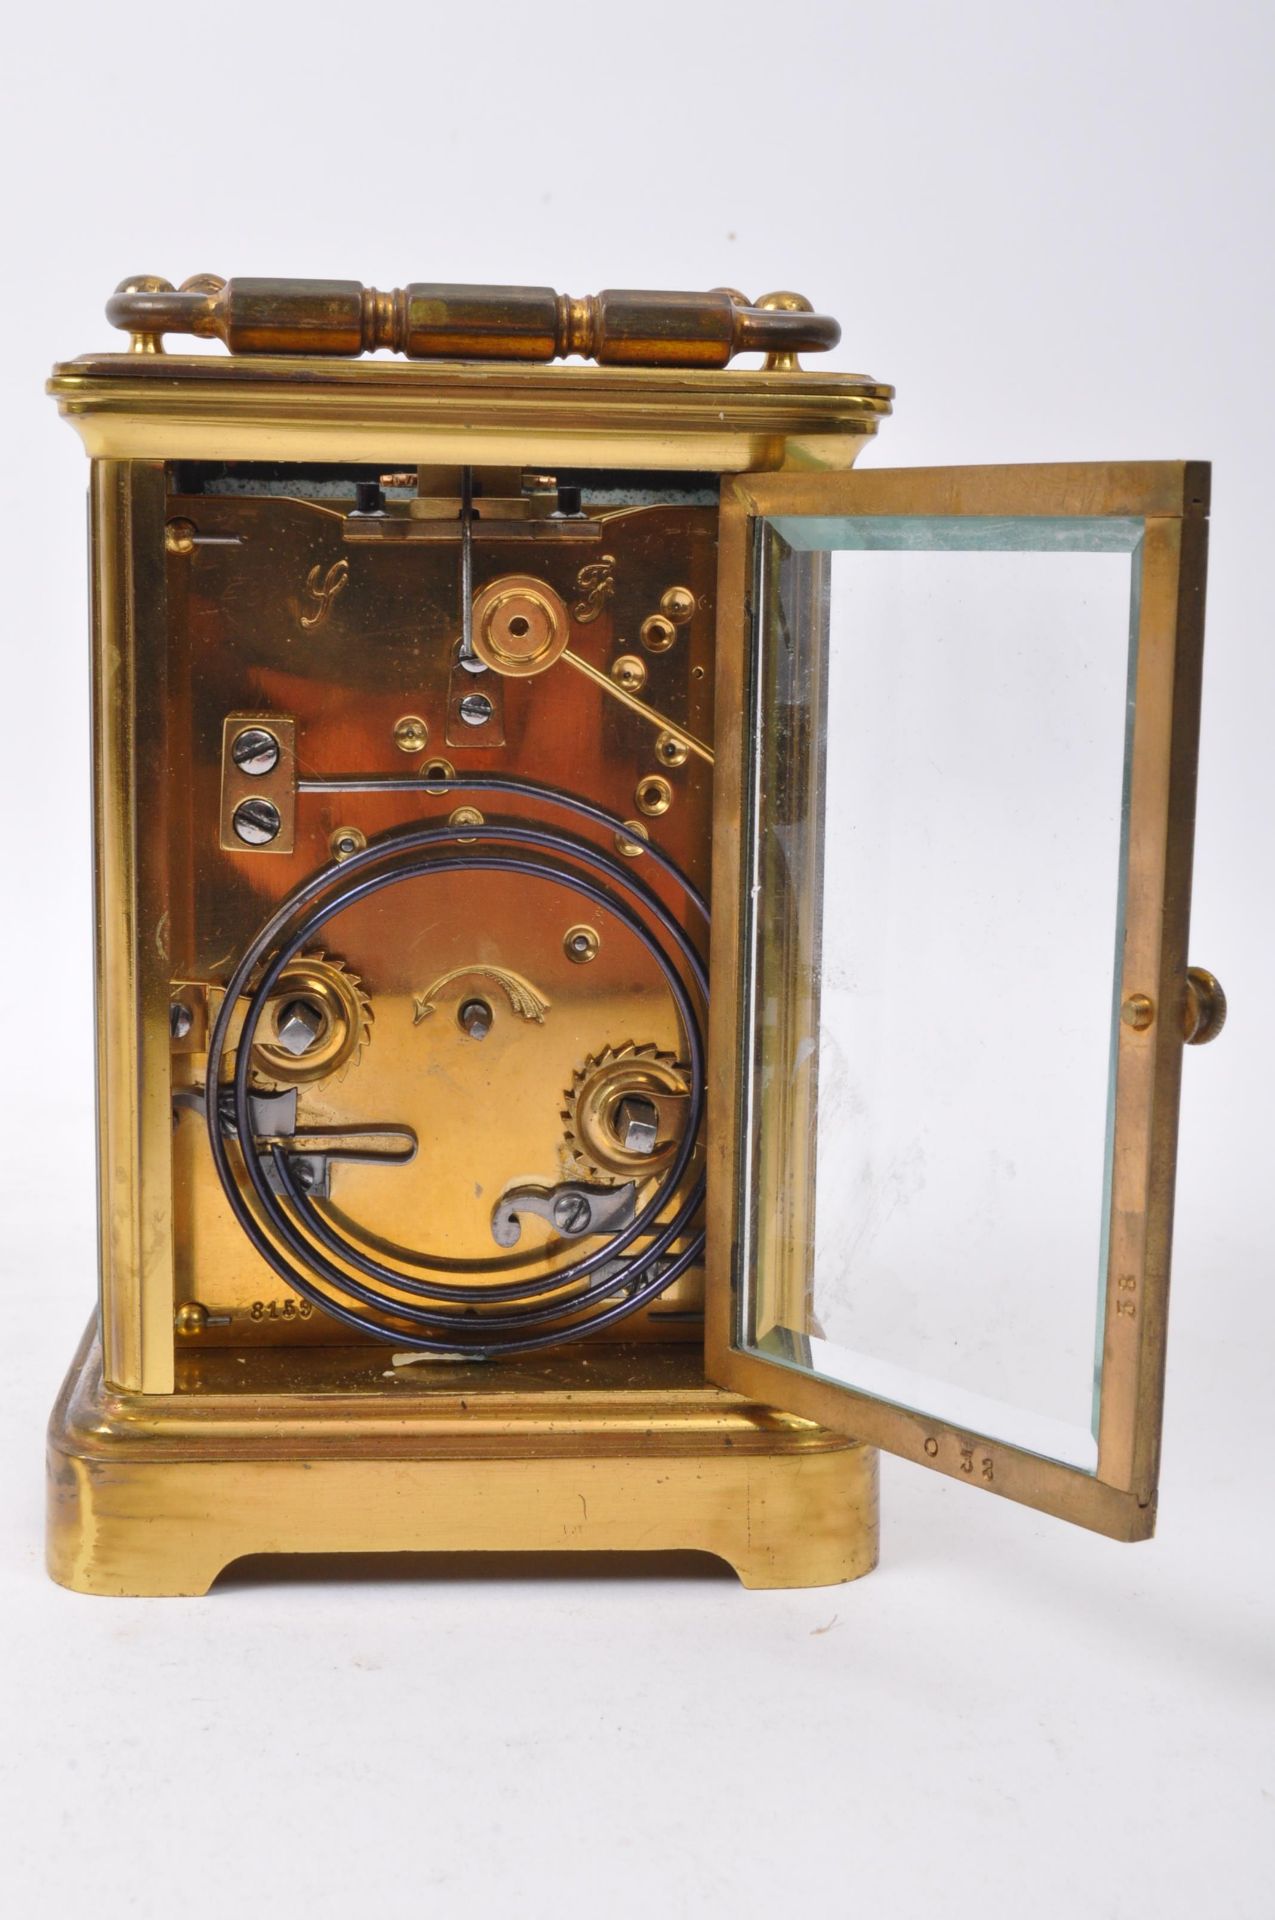 EARLY 20TH CENTURY BRASS CARRIAGE CLOCK - Image 4 of 5